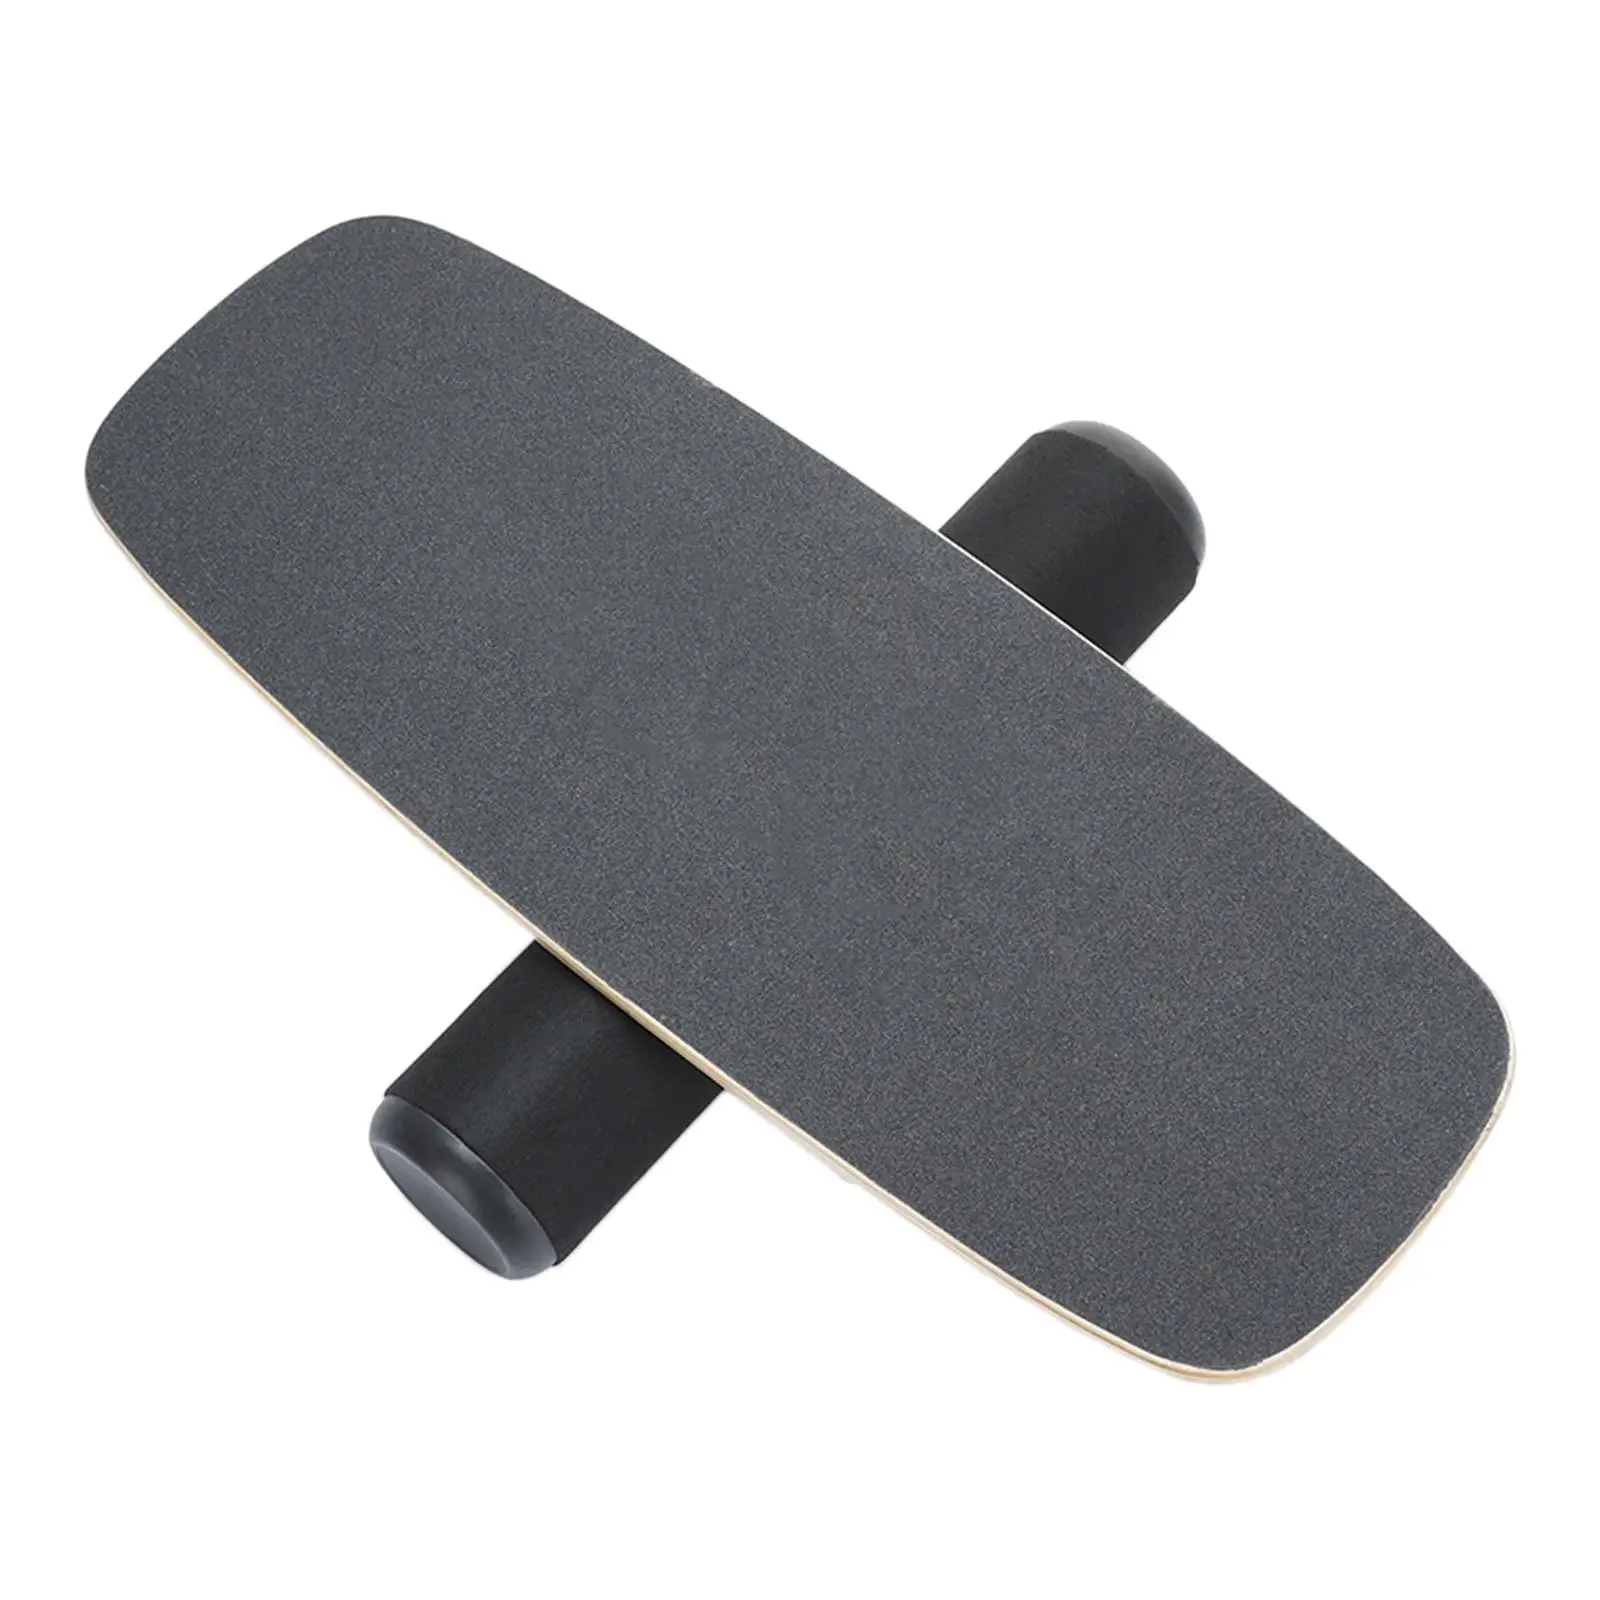 Wooden Balance Board trainer Accessories Balancing Board for Hockey